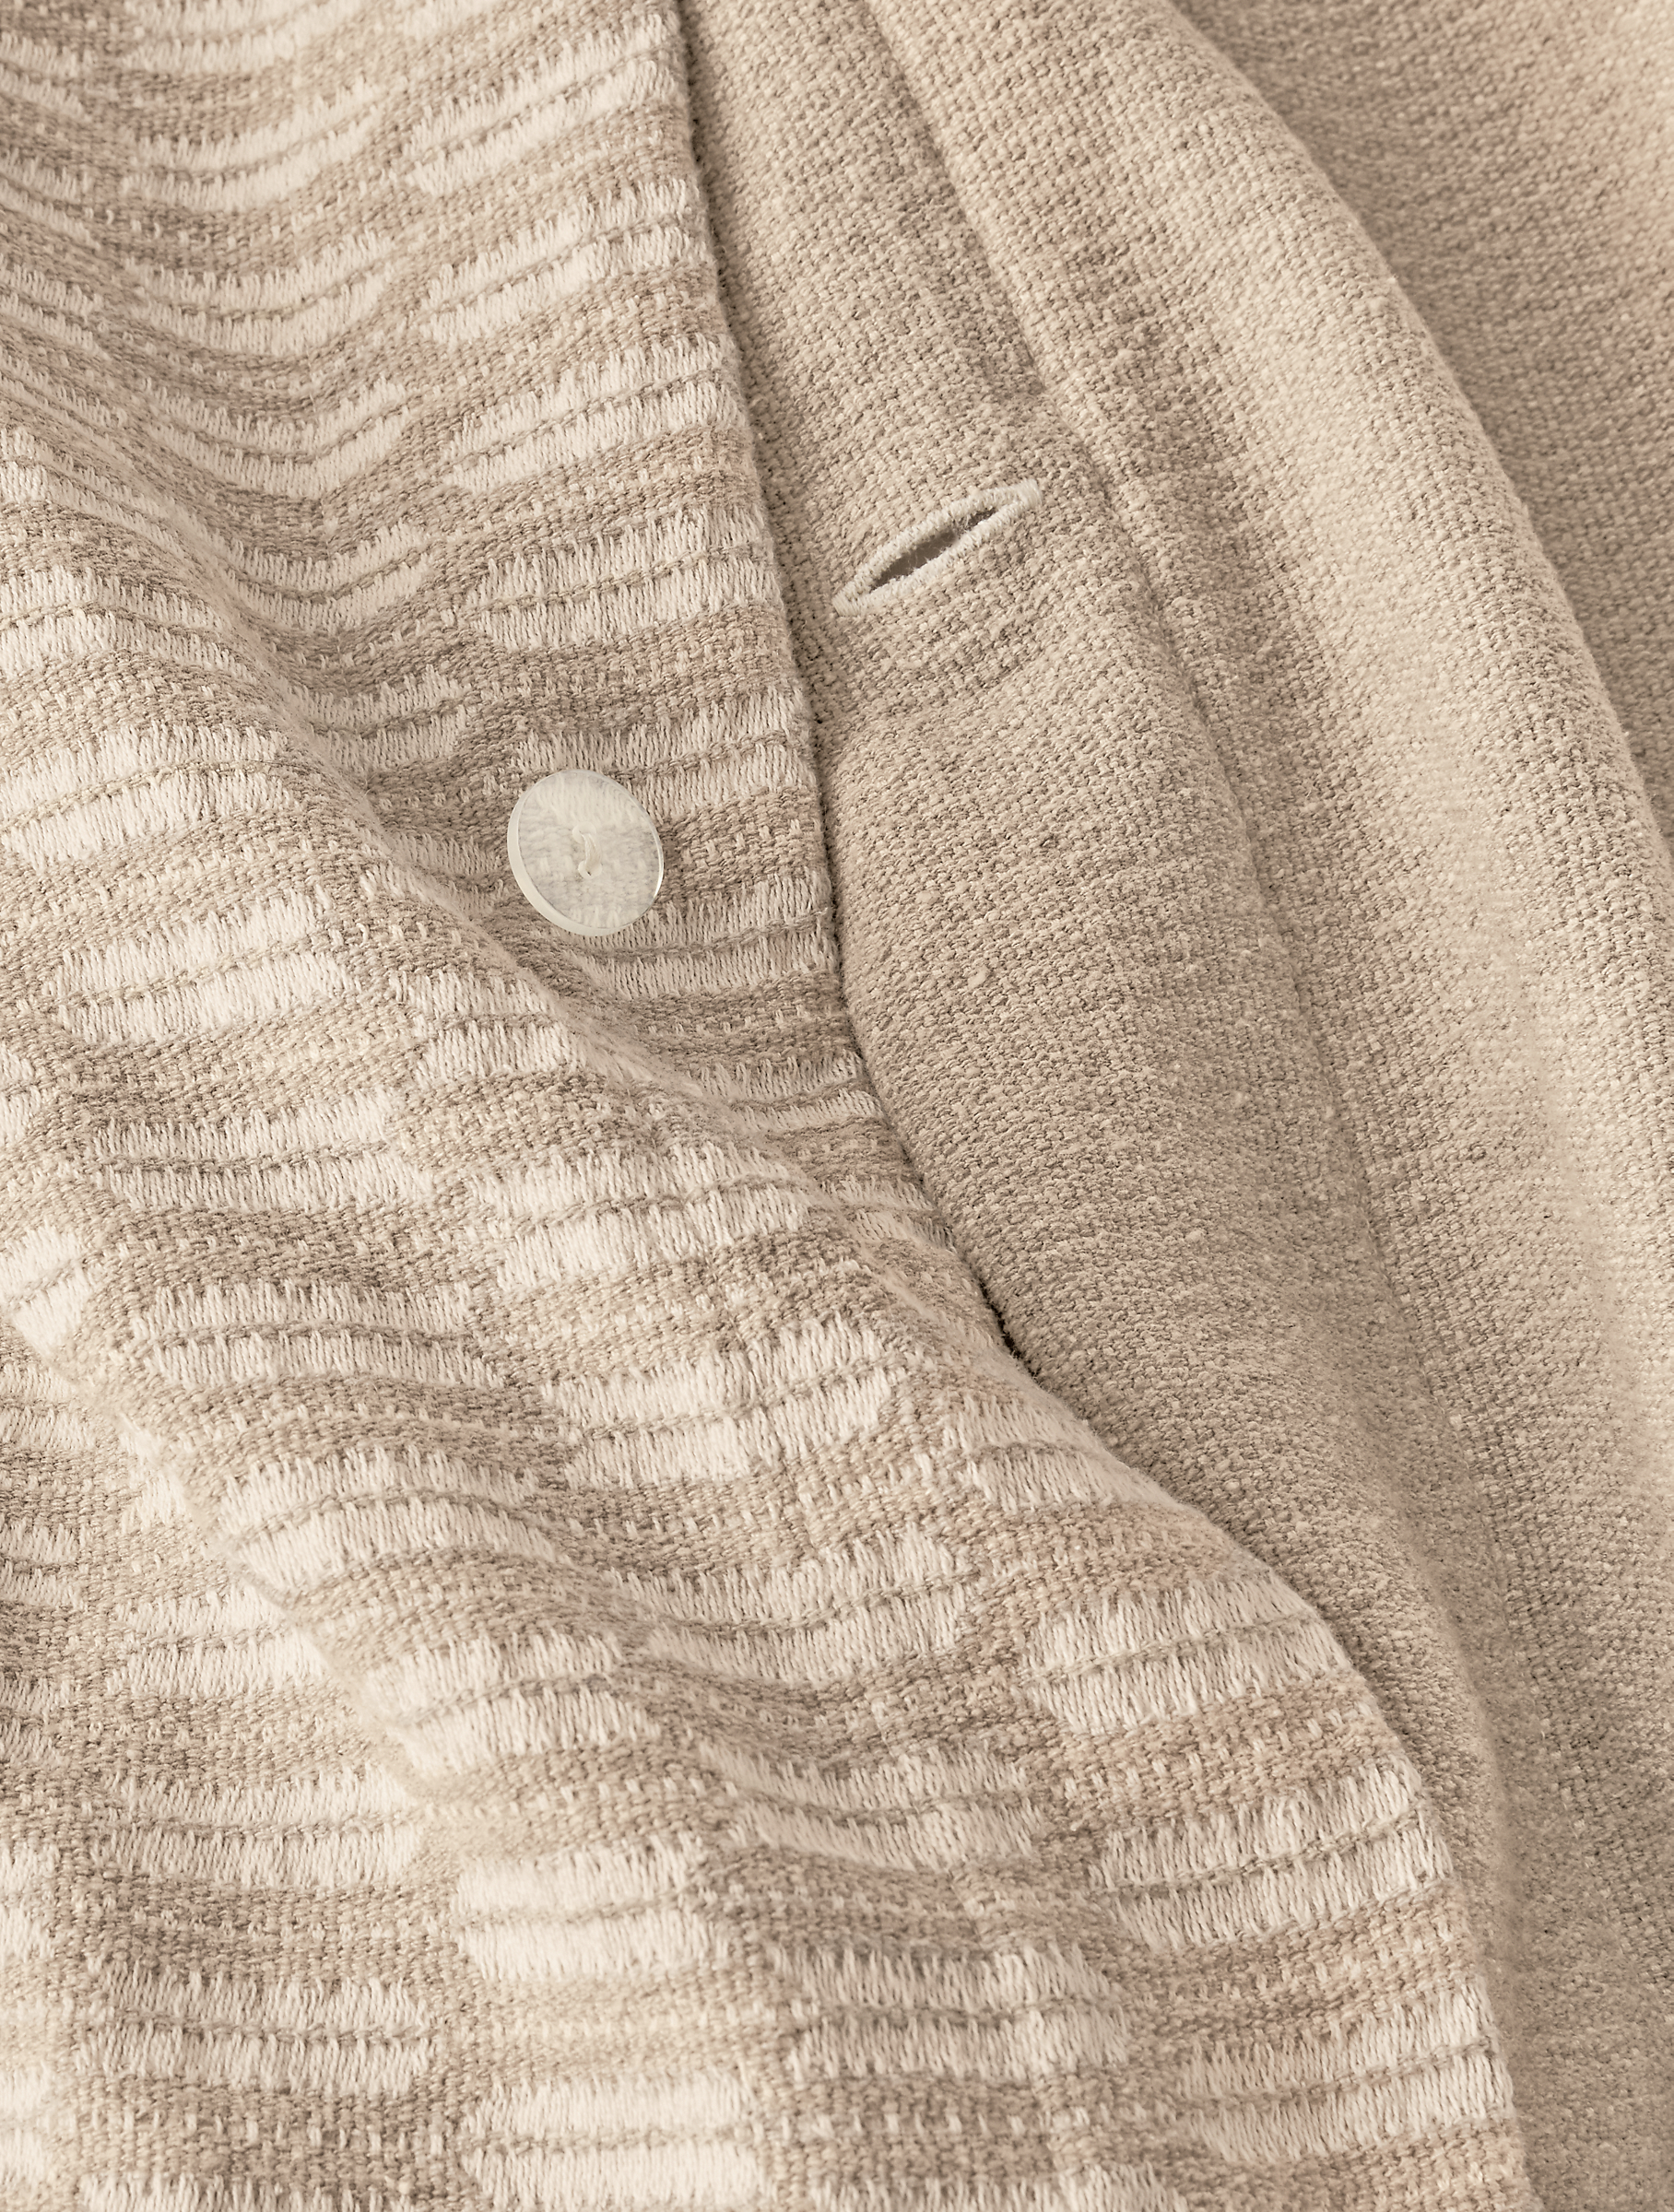 Close button detail of queen Sheffield duvet cover in ivory.